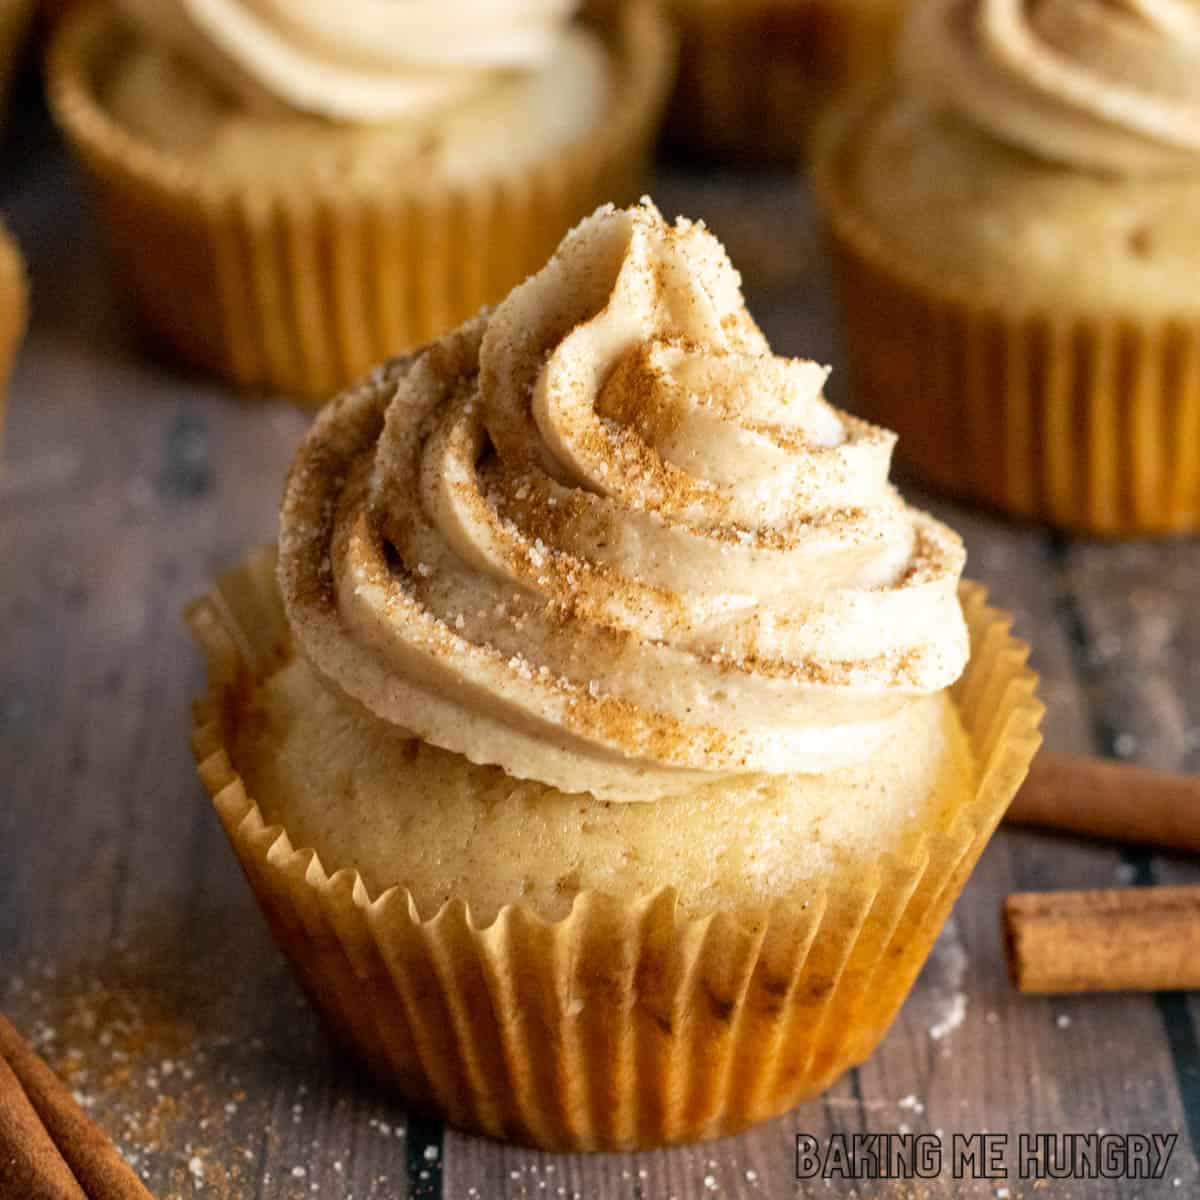 cinnamon cupcakes recipe shown with close up on cinnamon frosting